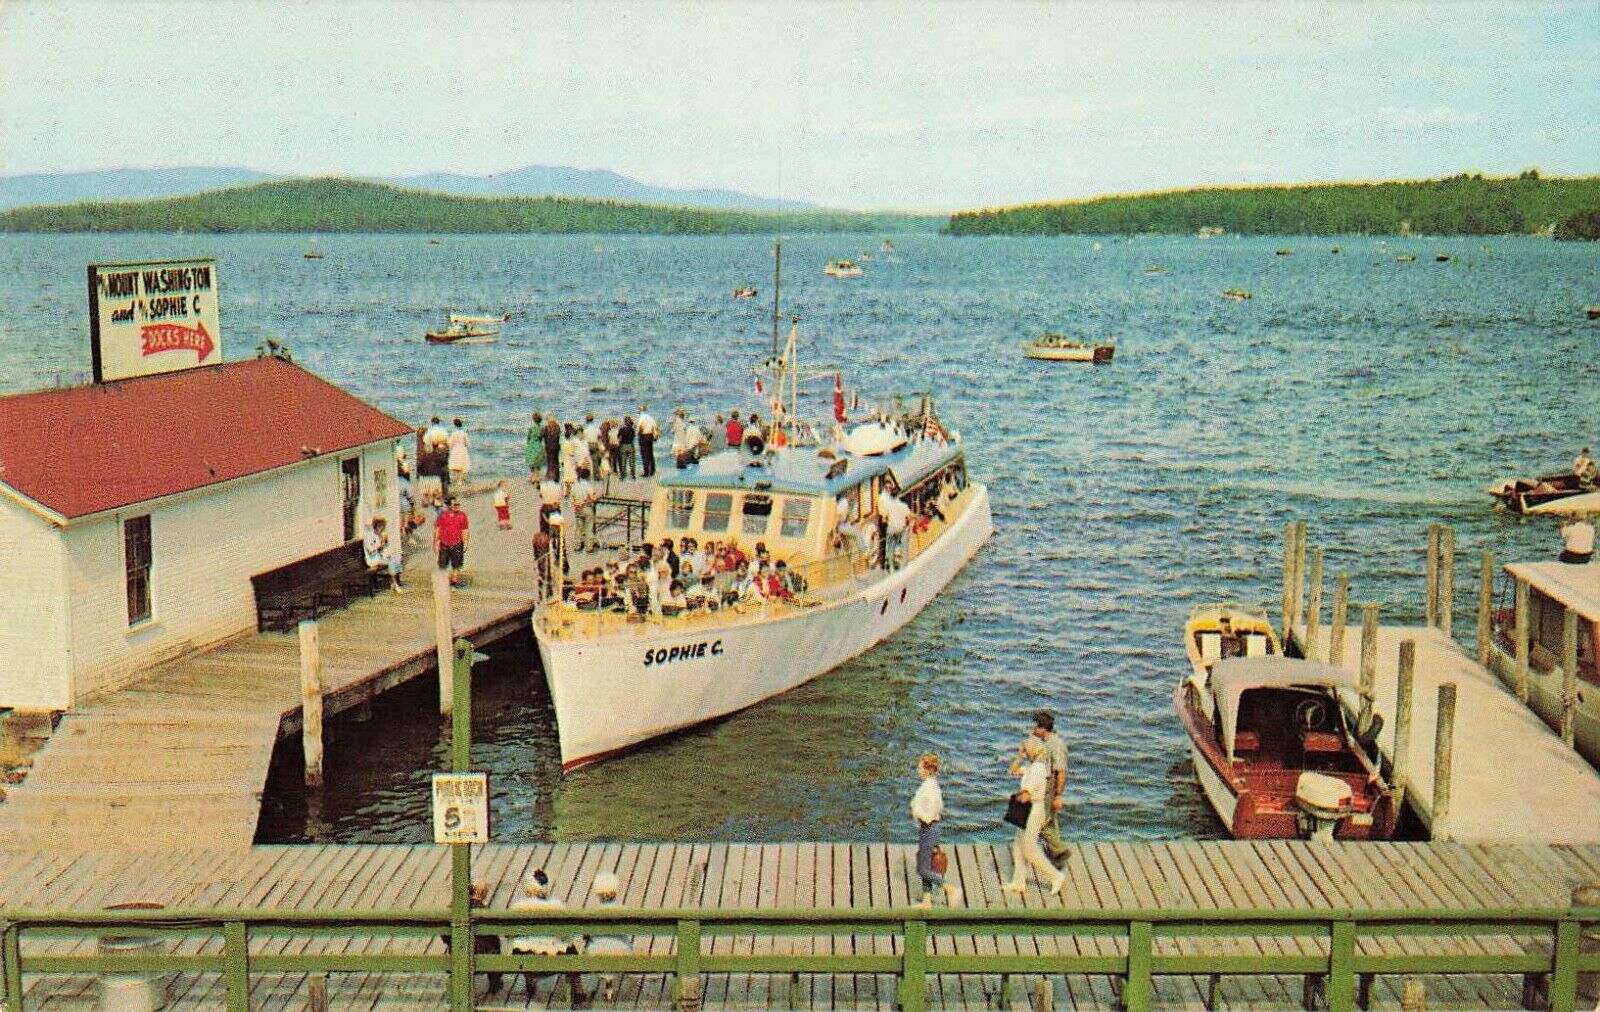 Weirs Beach, New Hampshire Postcard Boat Sophie C. at Dock   c1950s  N6